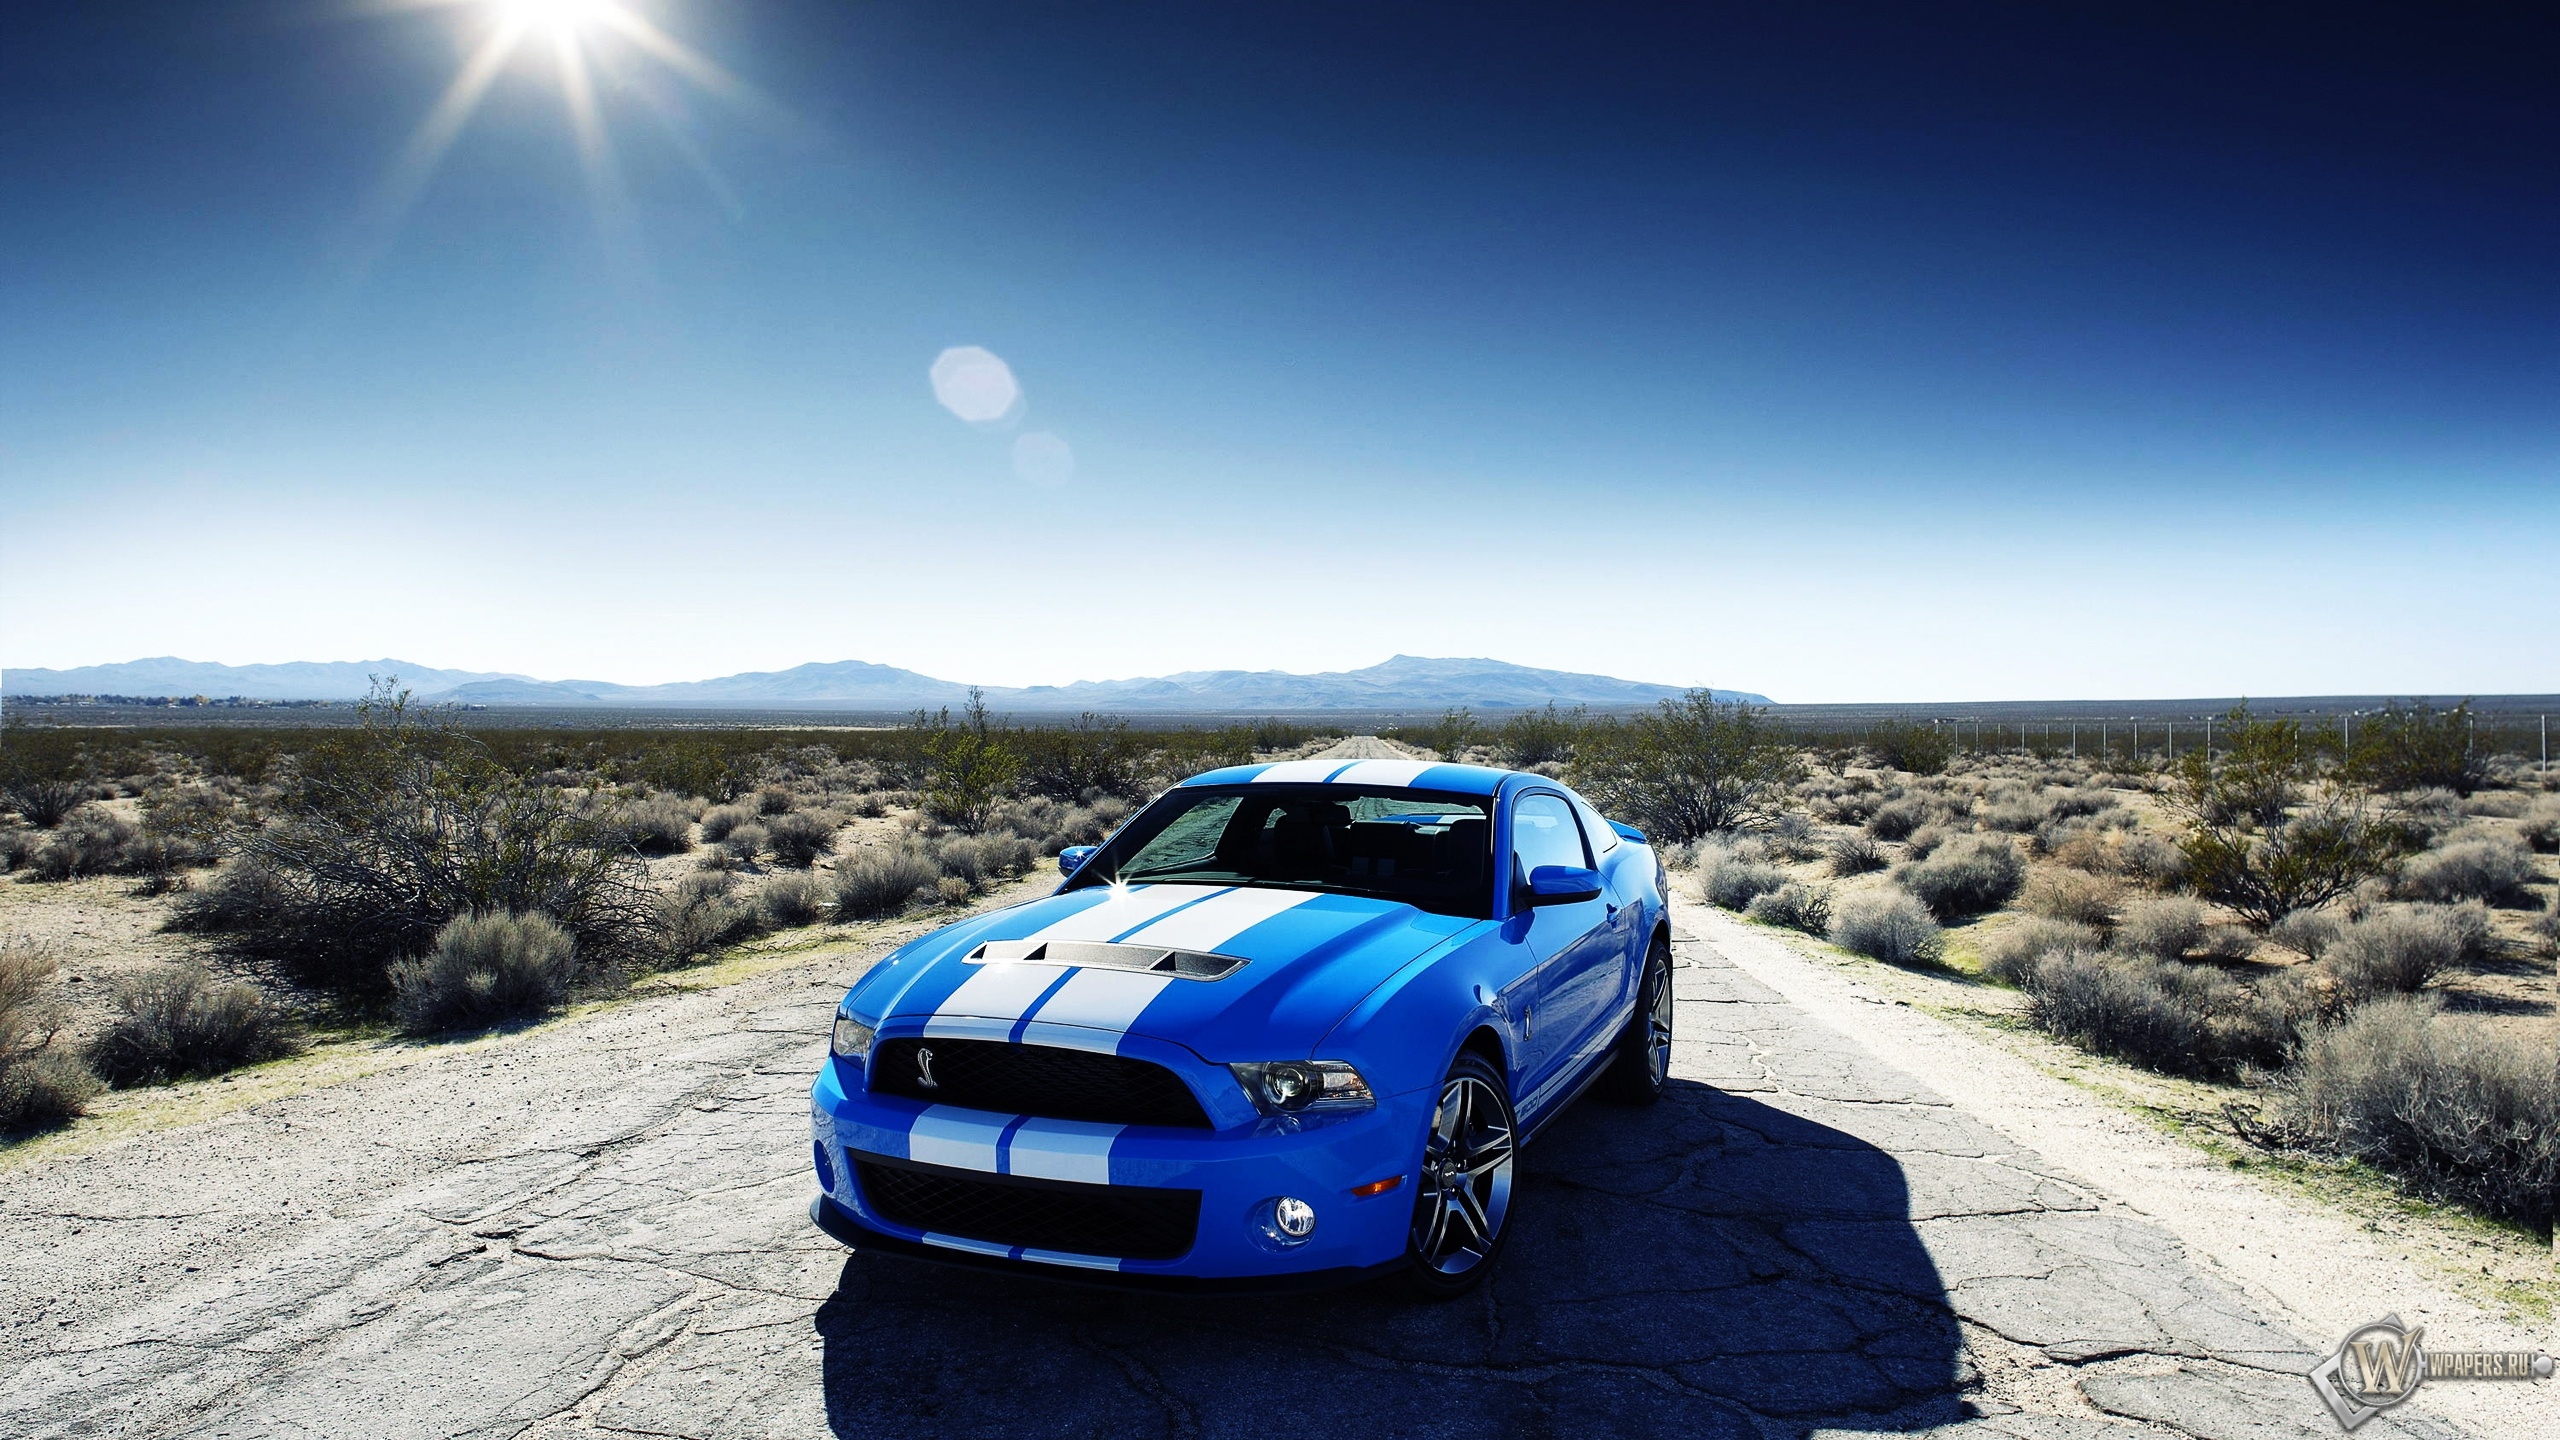 Ford Mustang Shelby 2560x1440